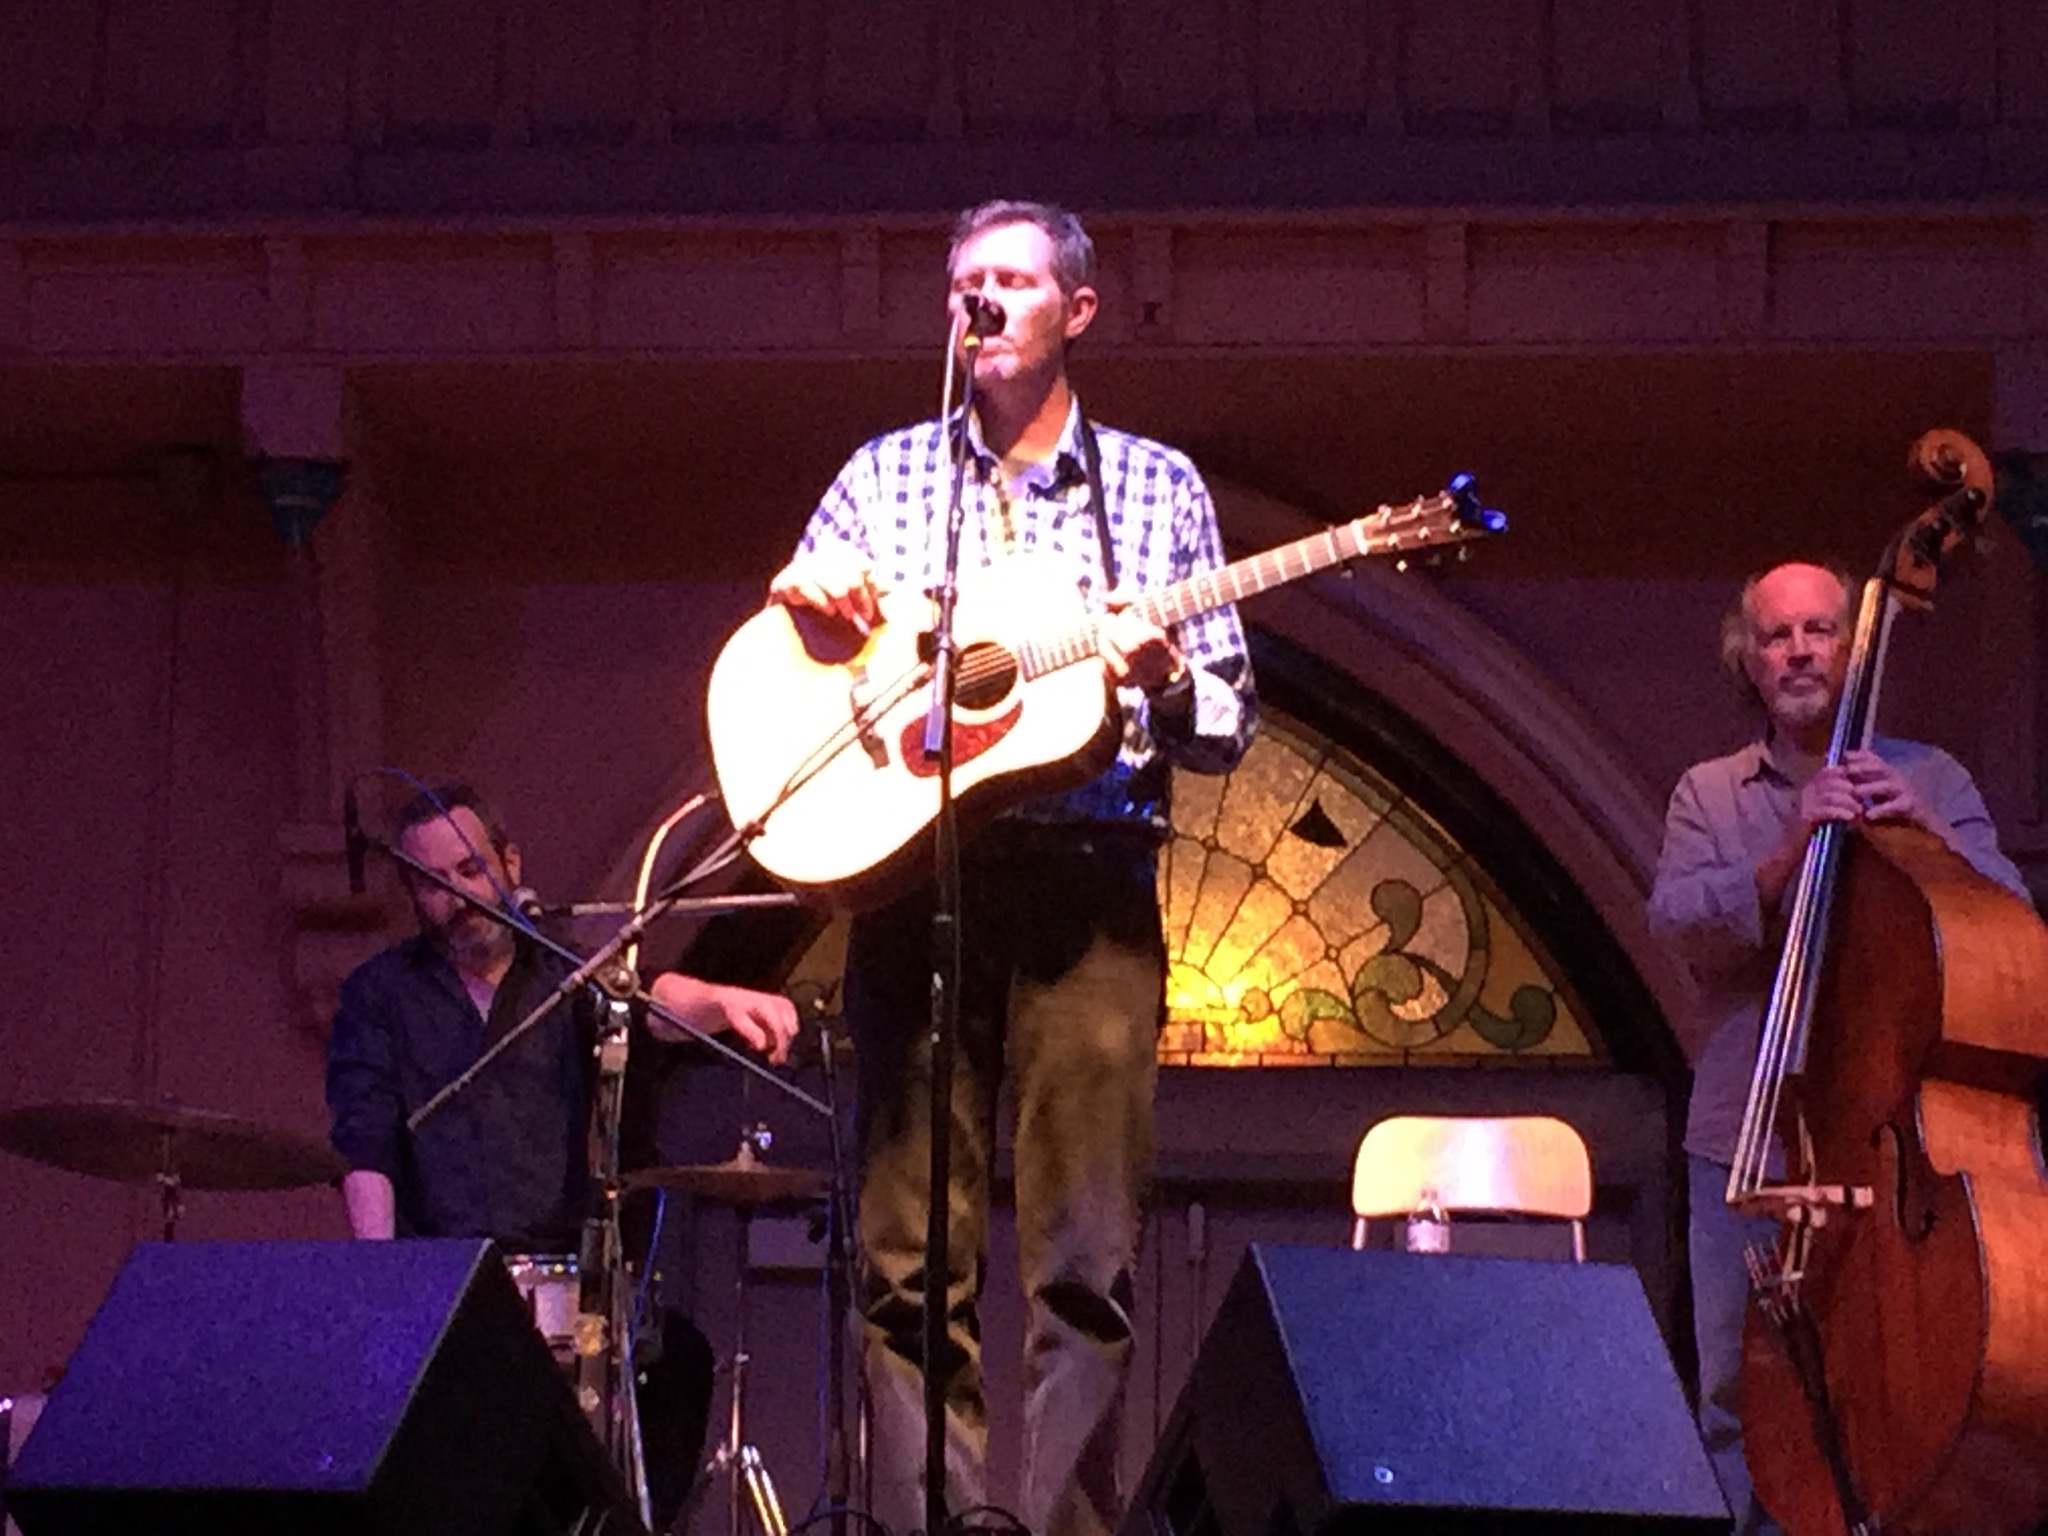 Robbie Fulks singing to a sparse but enthusiastic crowd at Southgate House Revival.  Photo taken by and the property of FourWalls.